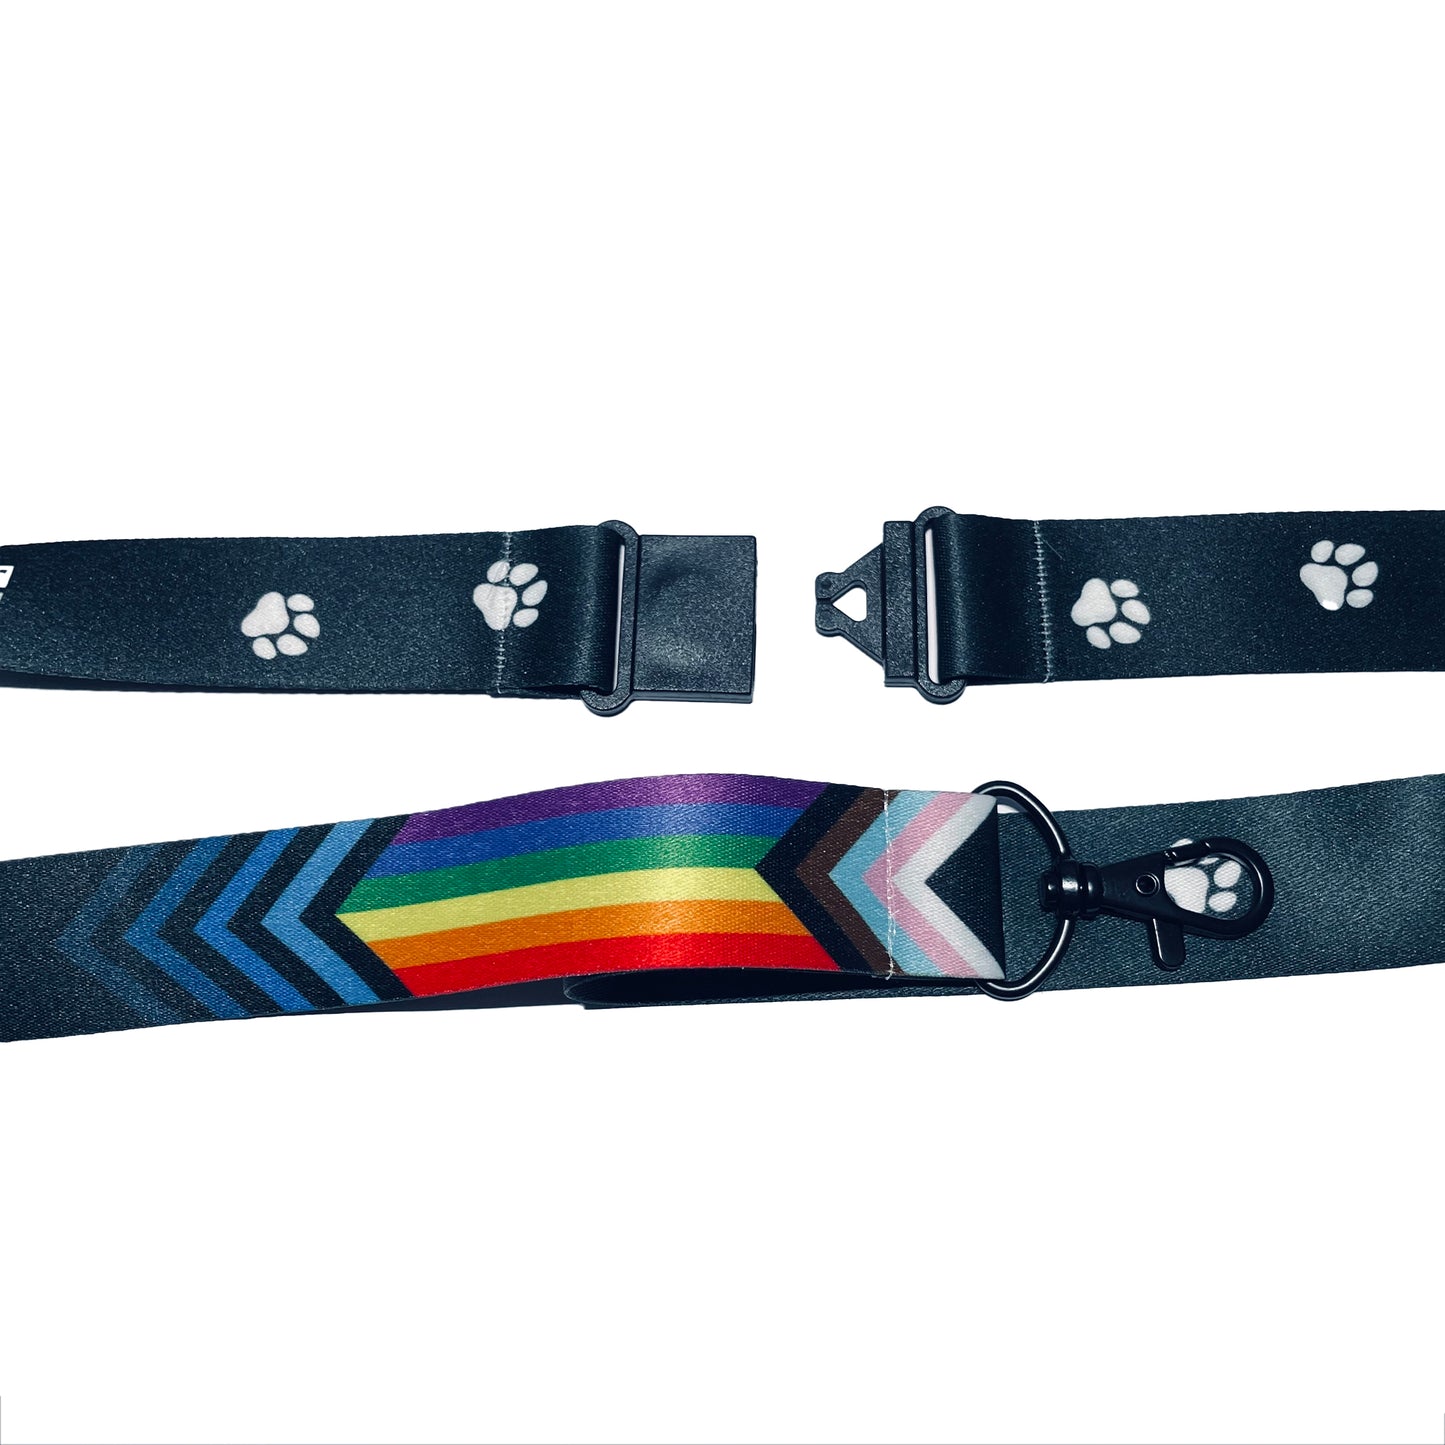 AwtterSpace Lanyard